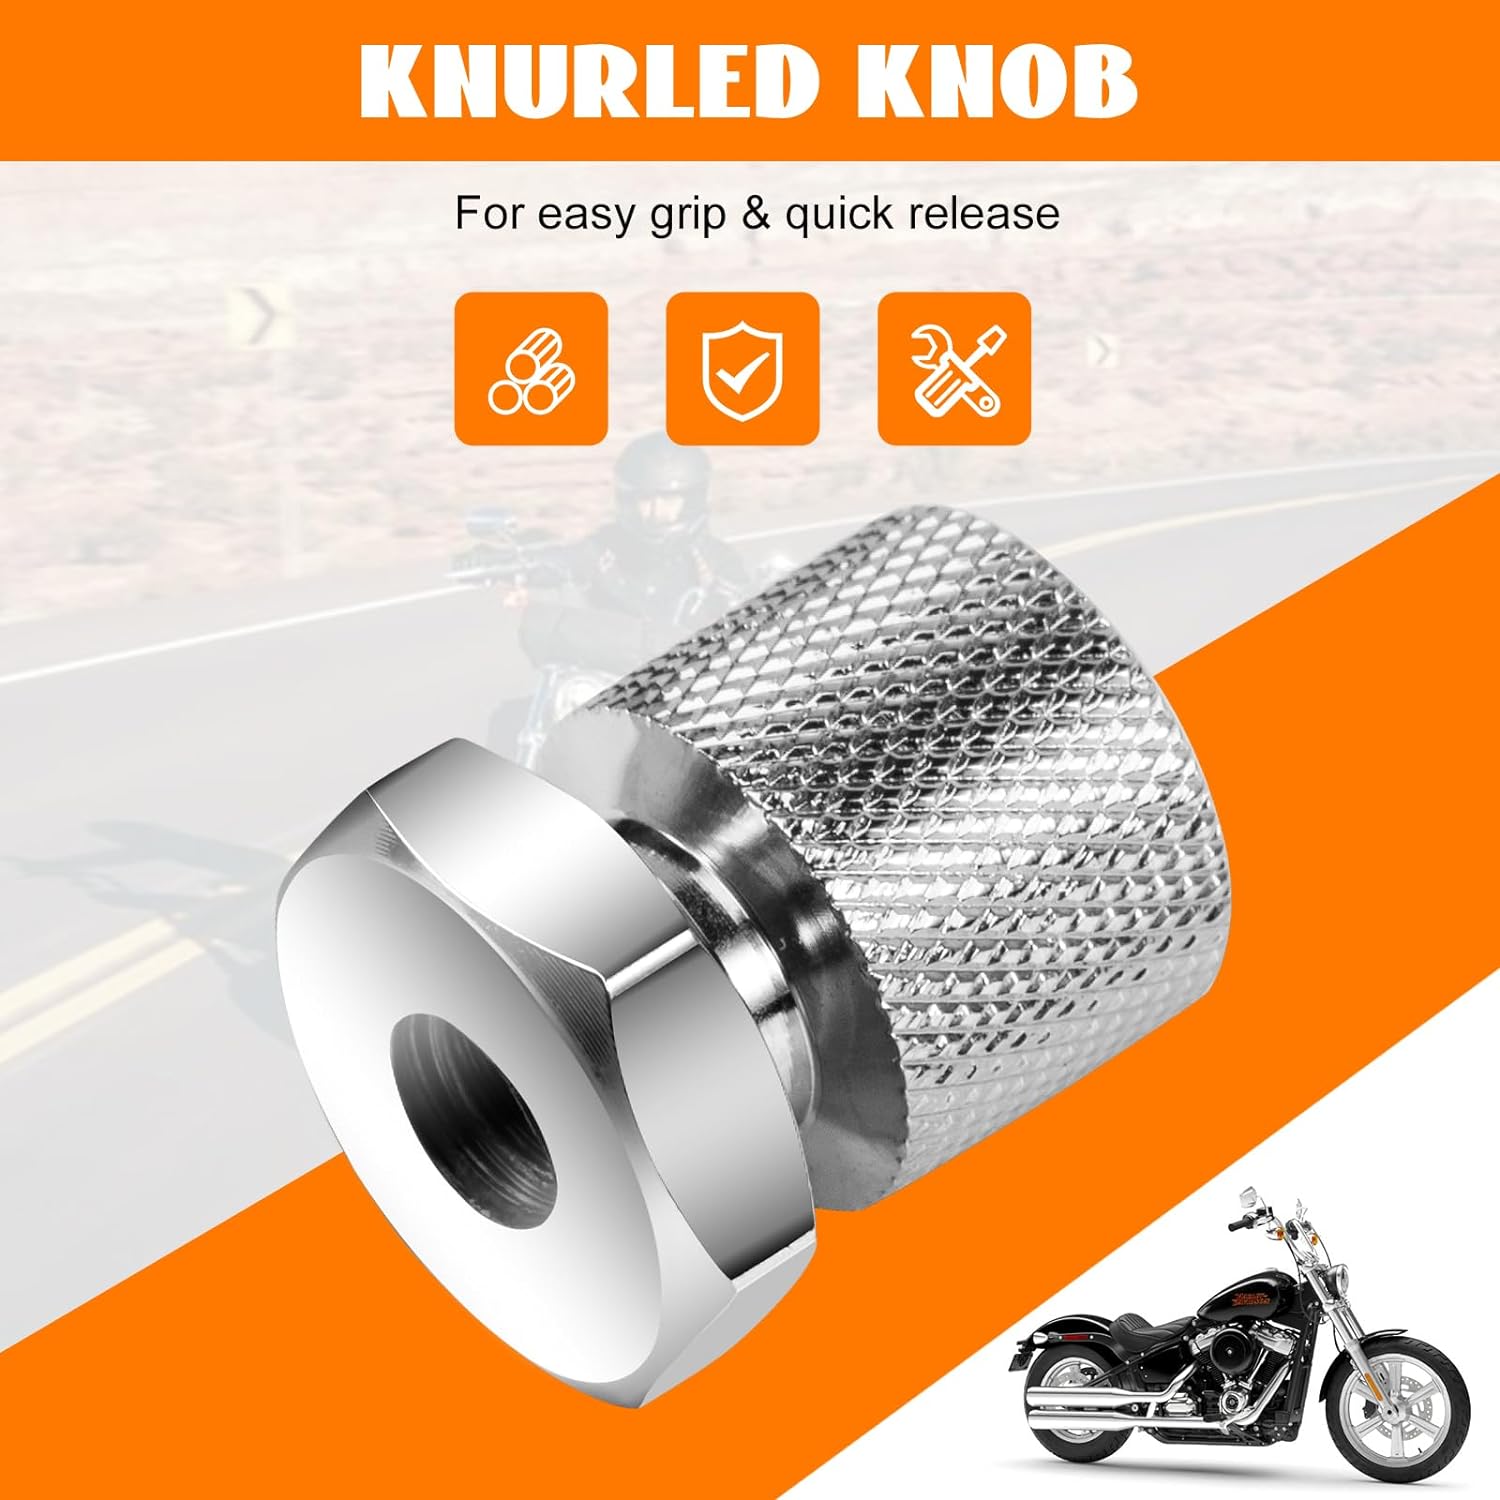 Eumti 3PCS Stainless Knurled Fender Rear Seat Bolt Screw with Solo seat mounting nut 1/4-20 Thread Skull Pattern Black Eyes Chrome Fit Harley Davidson All Touring Softail Models 1999-Later - Eumti Rear Seat Bolt Screw Review